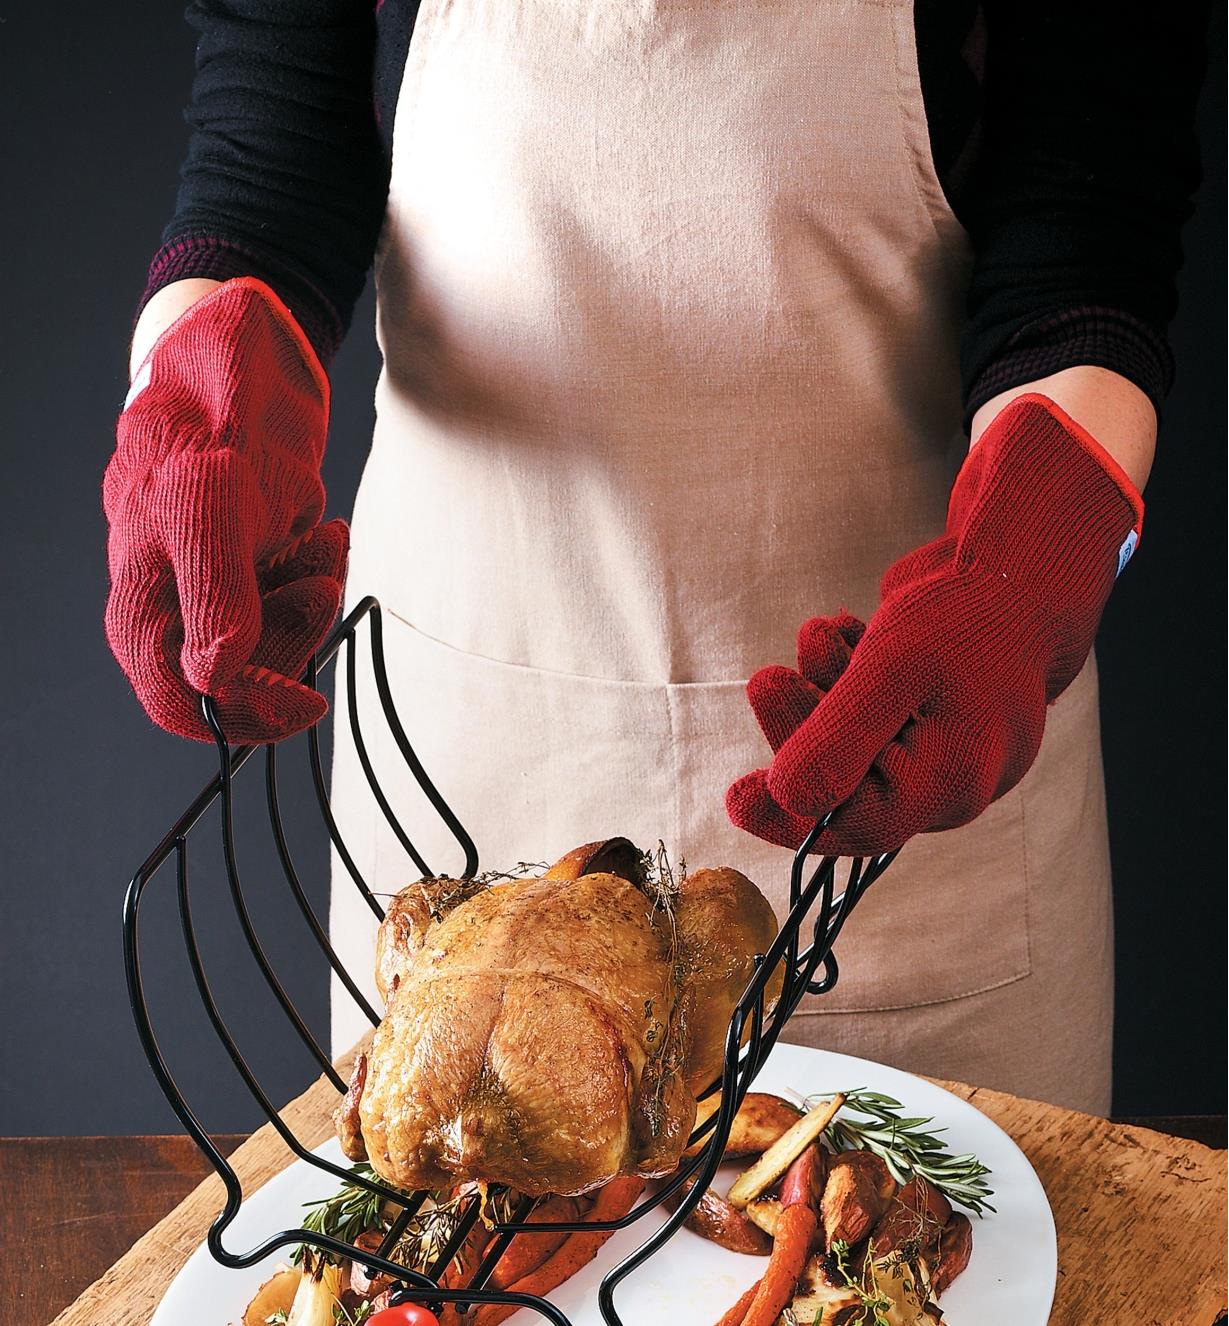 Oven gloves protect hands when transferring a roasted chicken from a pan to a serving plate